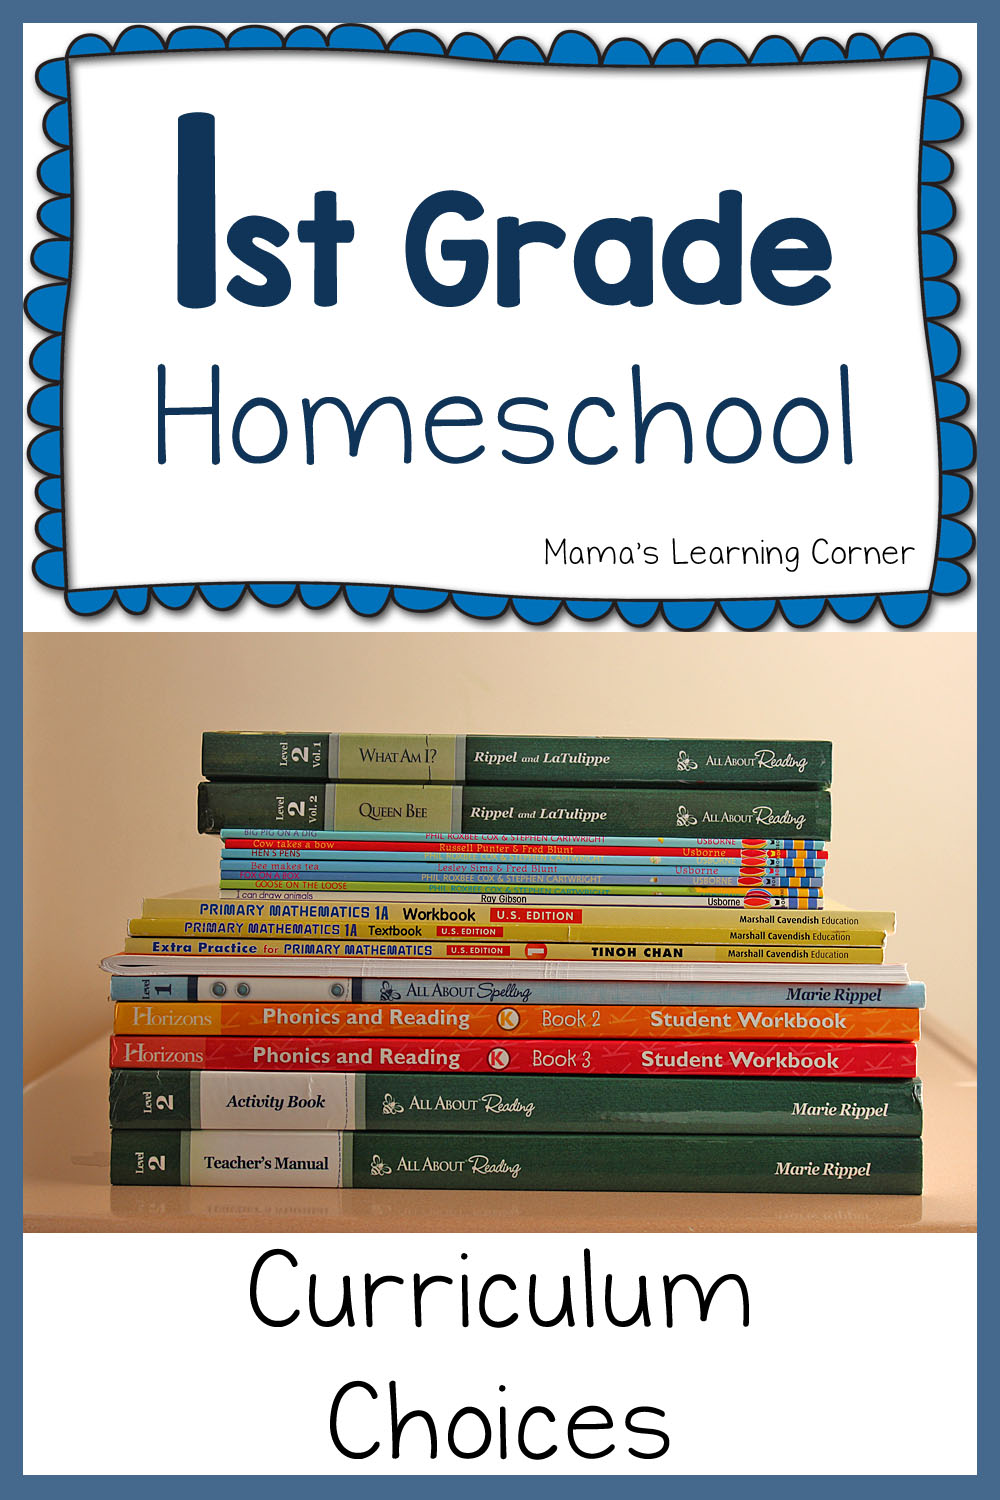 First Grade Curriculum Homeschool Plans for 2015-2016 - Mamas Learning